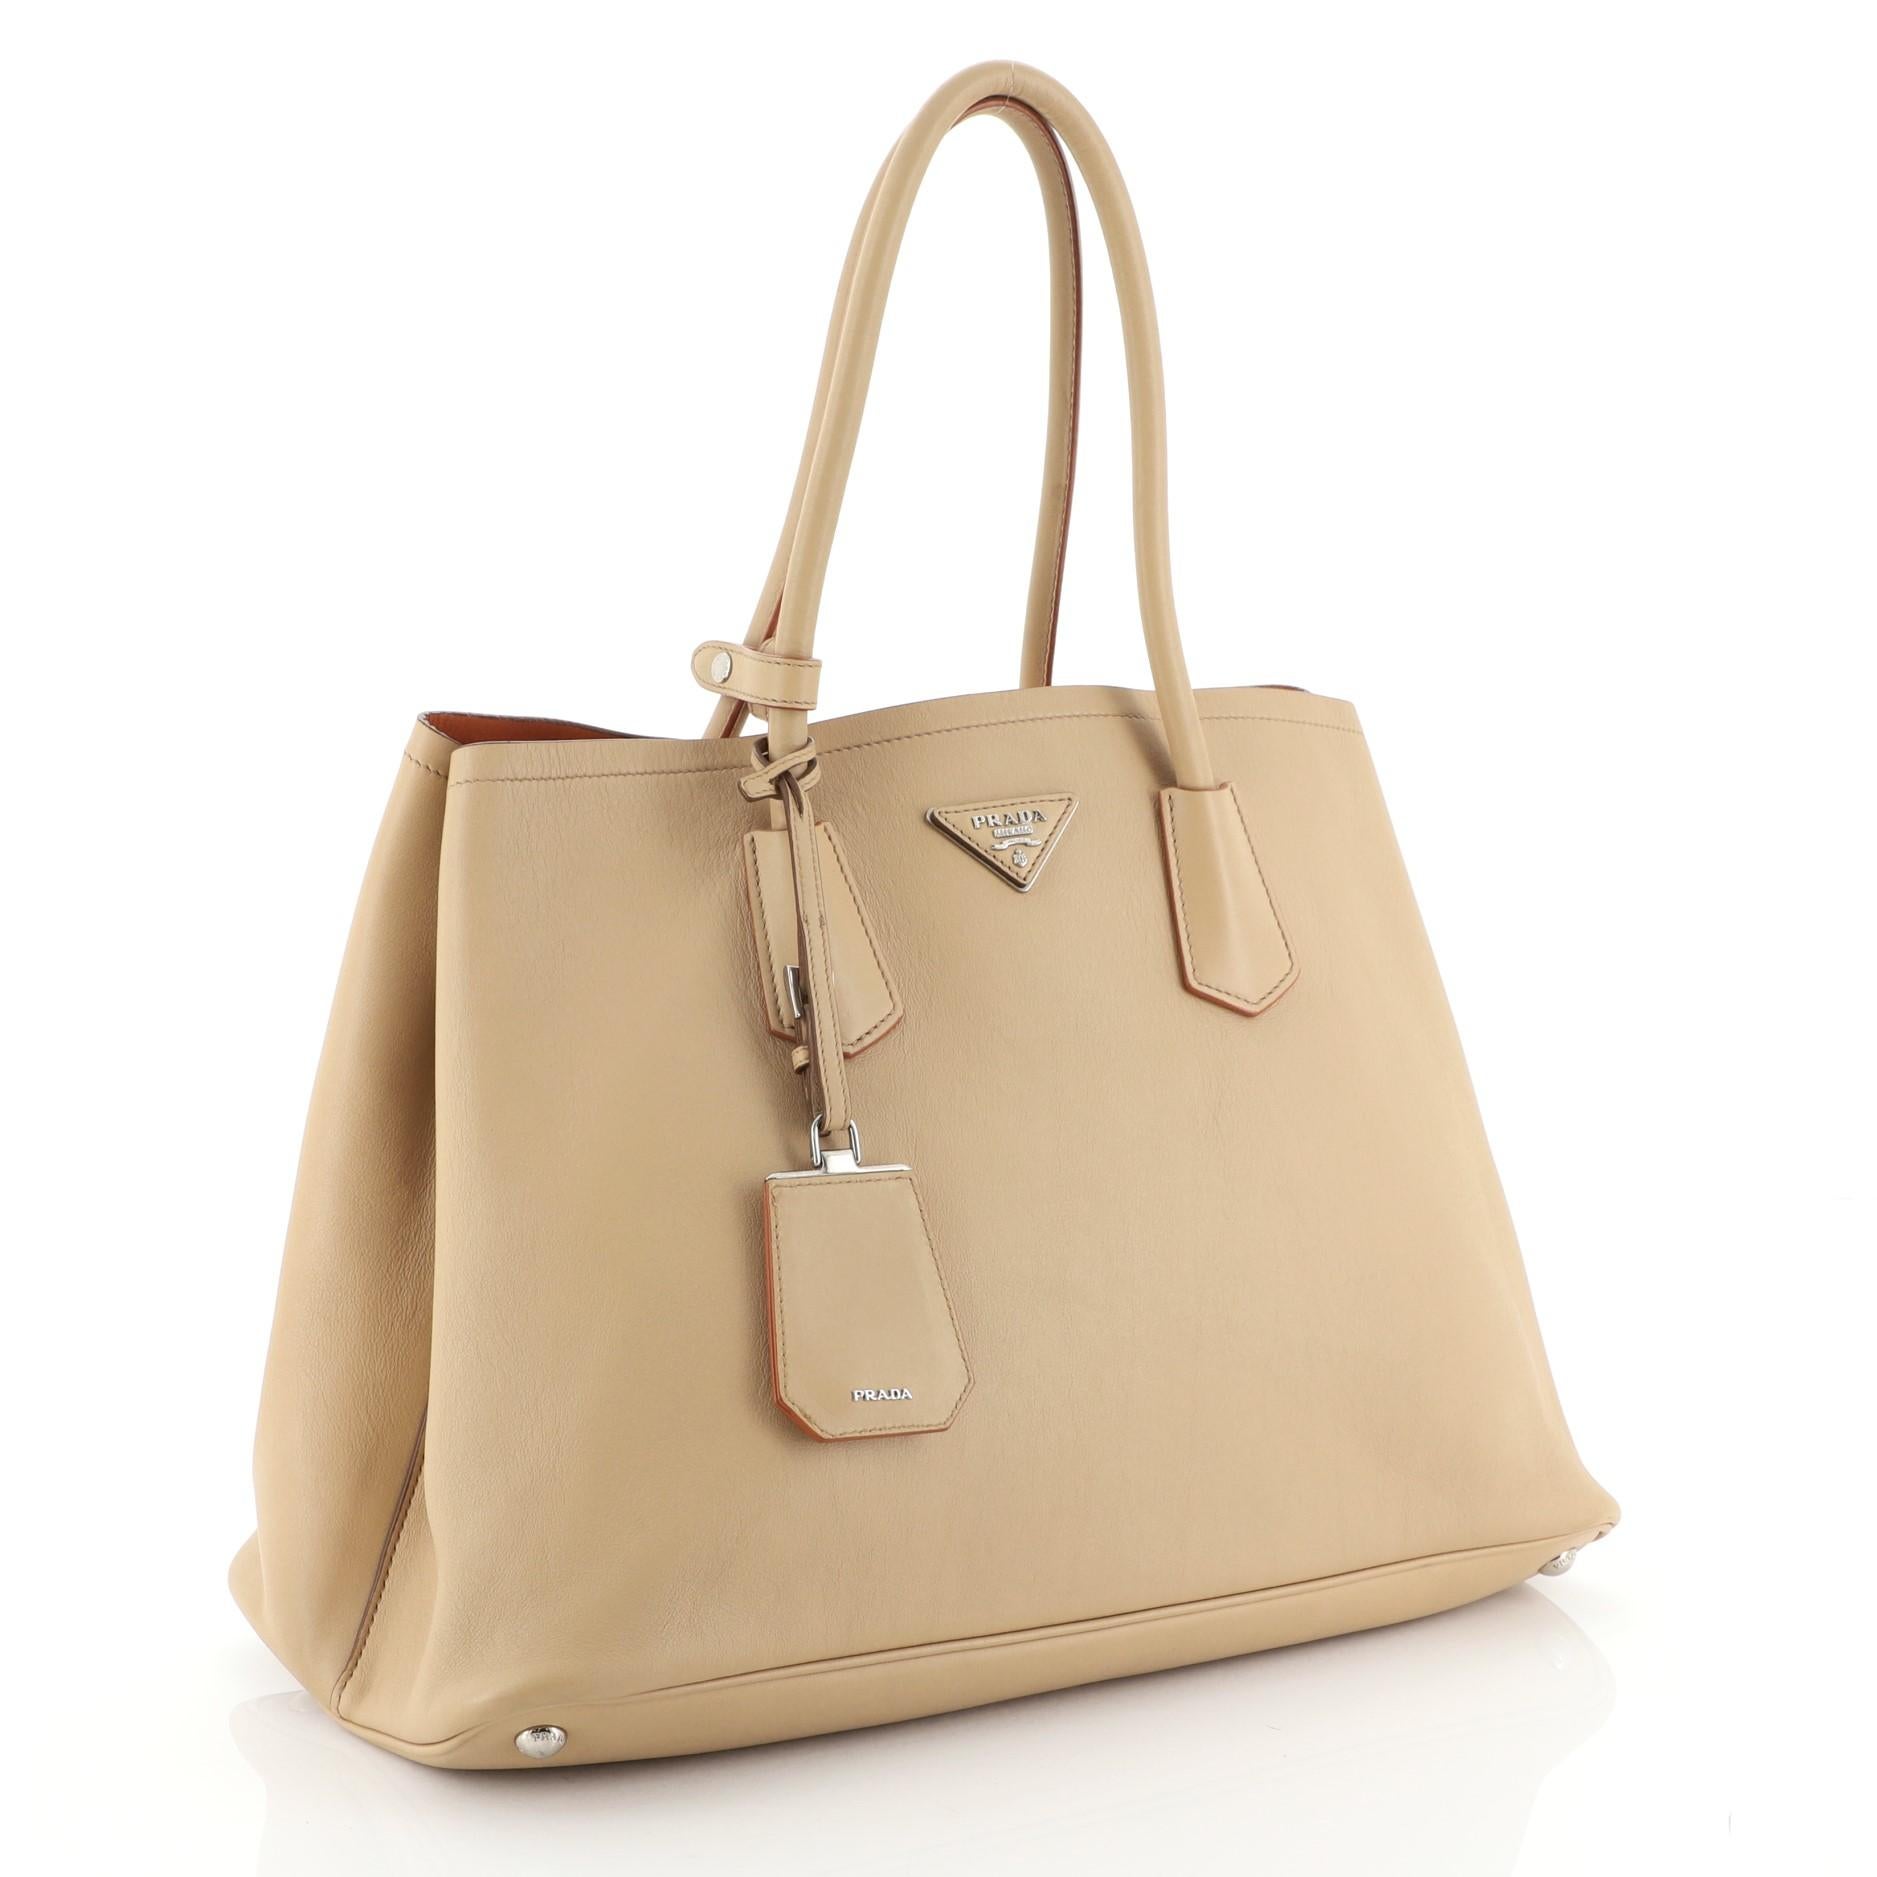 This Prada Cuir Double Tote City Calfskin Large, crafted from neutral calfskin leather, features dual-rolled handles, side snap buttons, protective base studs, Prada's trademark triangle logo at the center and silver-tone hardware accents. It opens